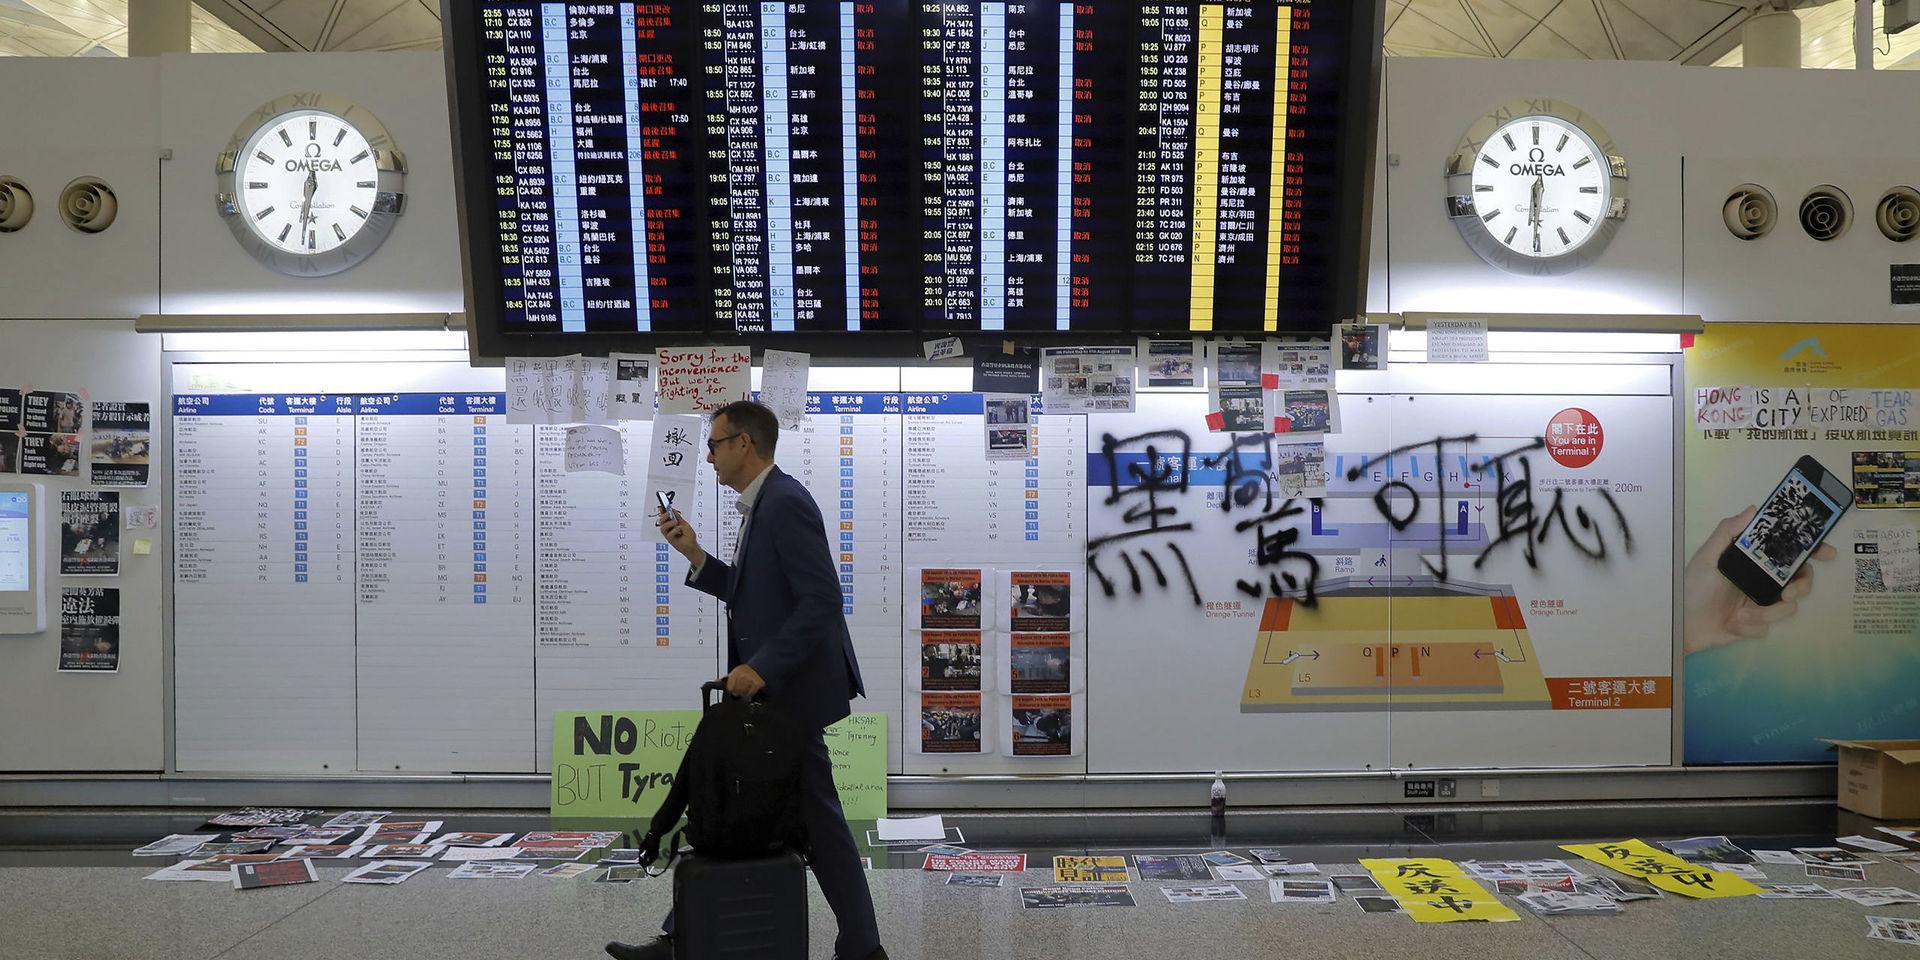 A traveler walks by protest placards placed around the flights information board as thousands of protesters stage a sit-in protest at the Hong Kong International Airport, Monday, Aug. 12, 2019. One of the world&apos;s busiest airports canceled all flights after thousands of Hong Kong pro-democracy protesters crowded into the main terminal Monday afternoon. (AP Photo/Kin Cheung)